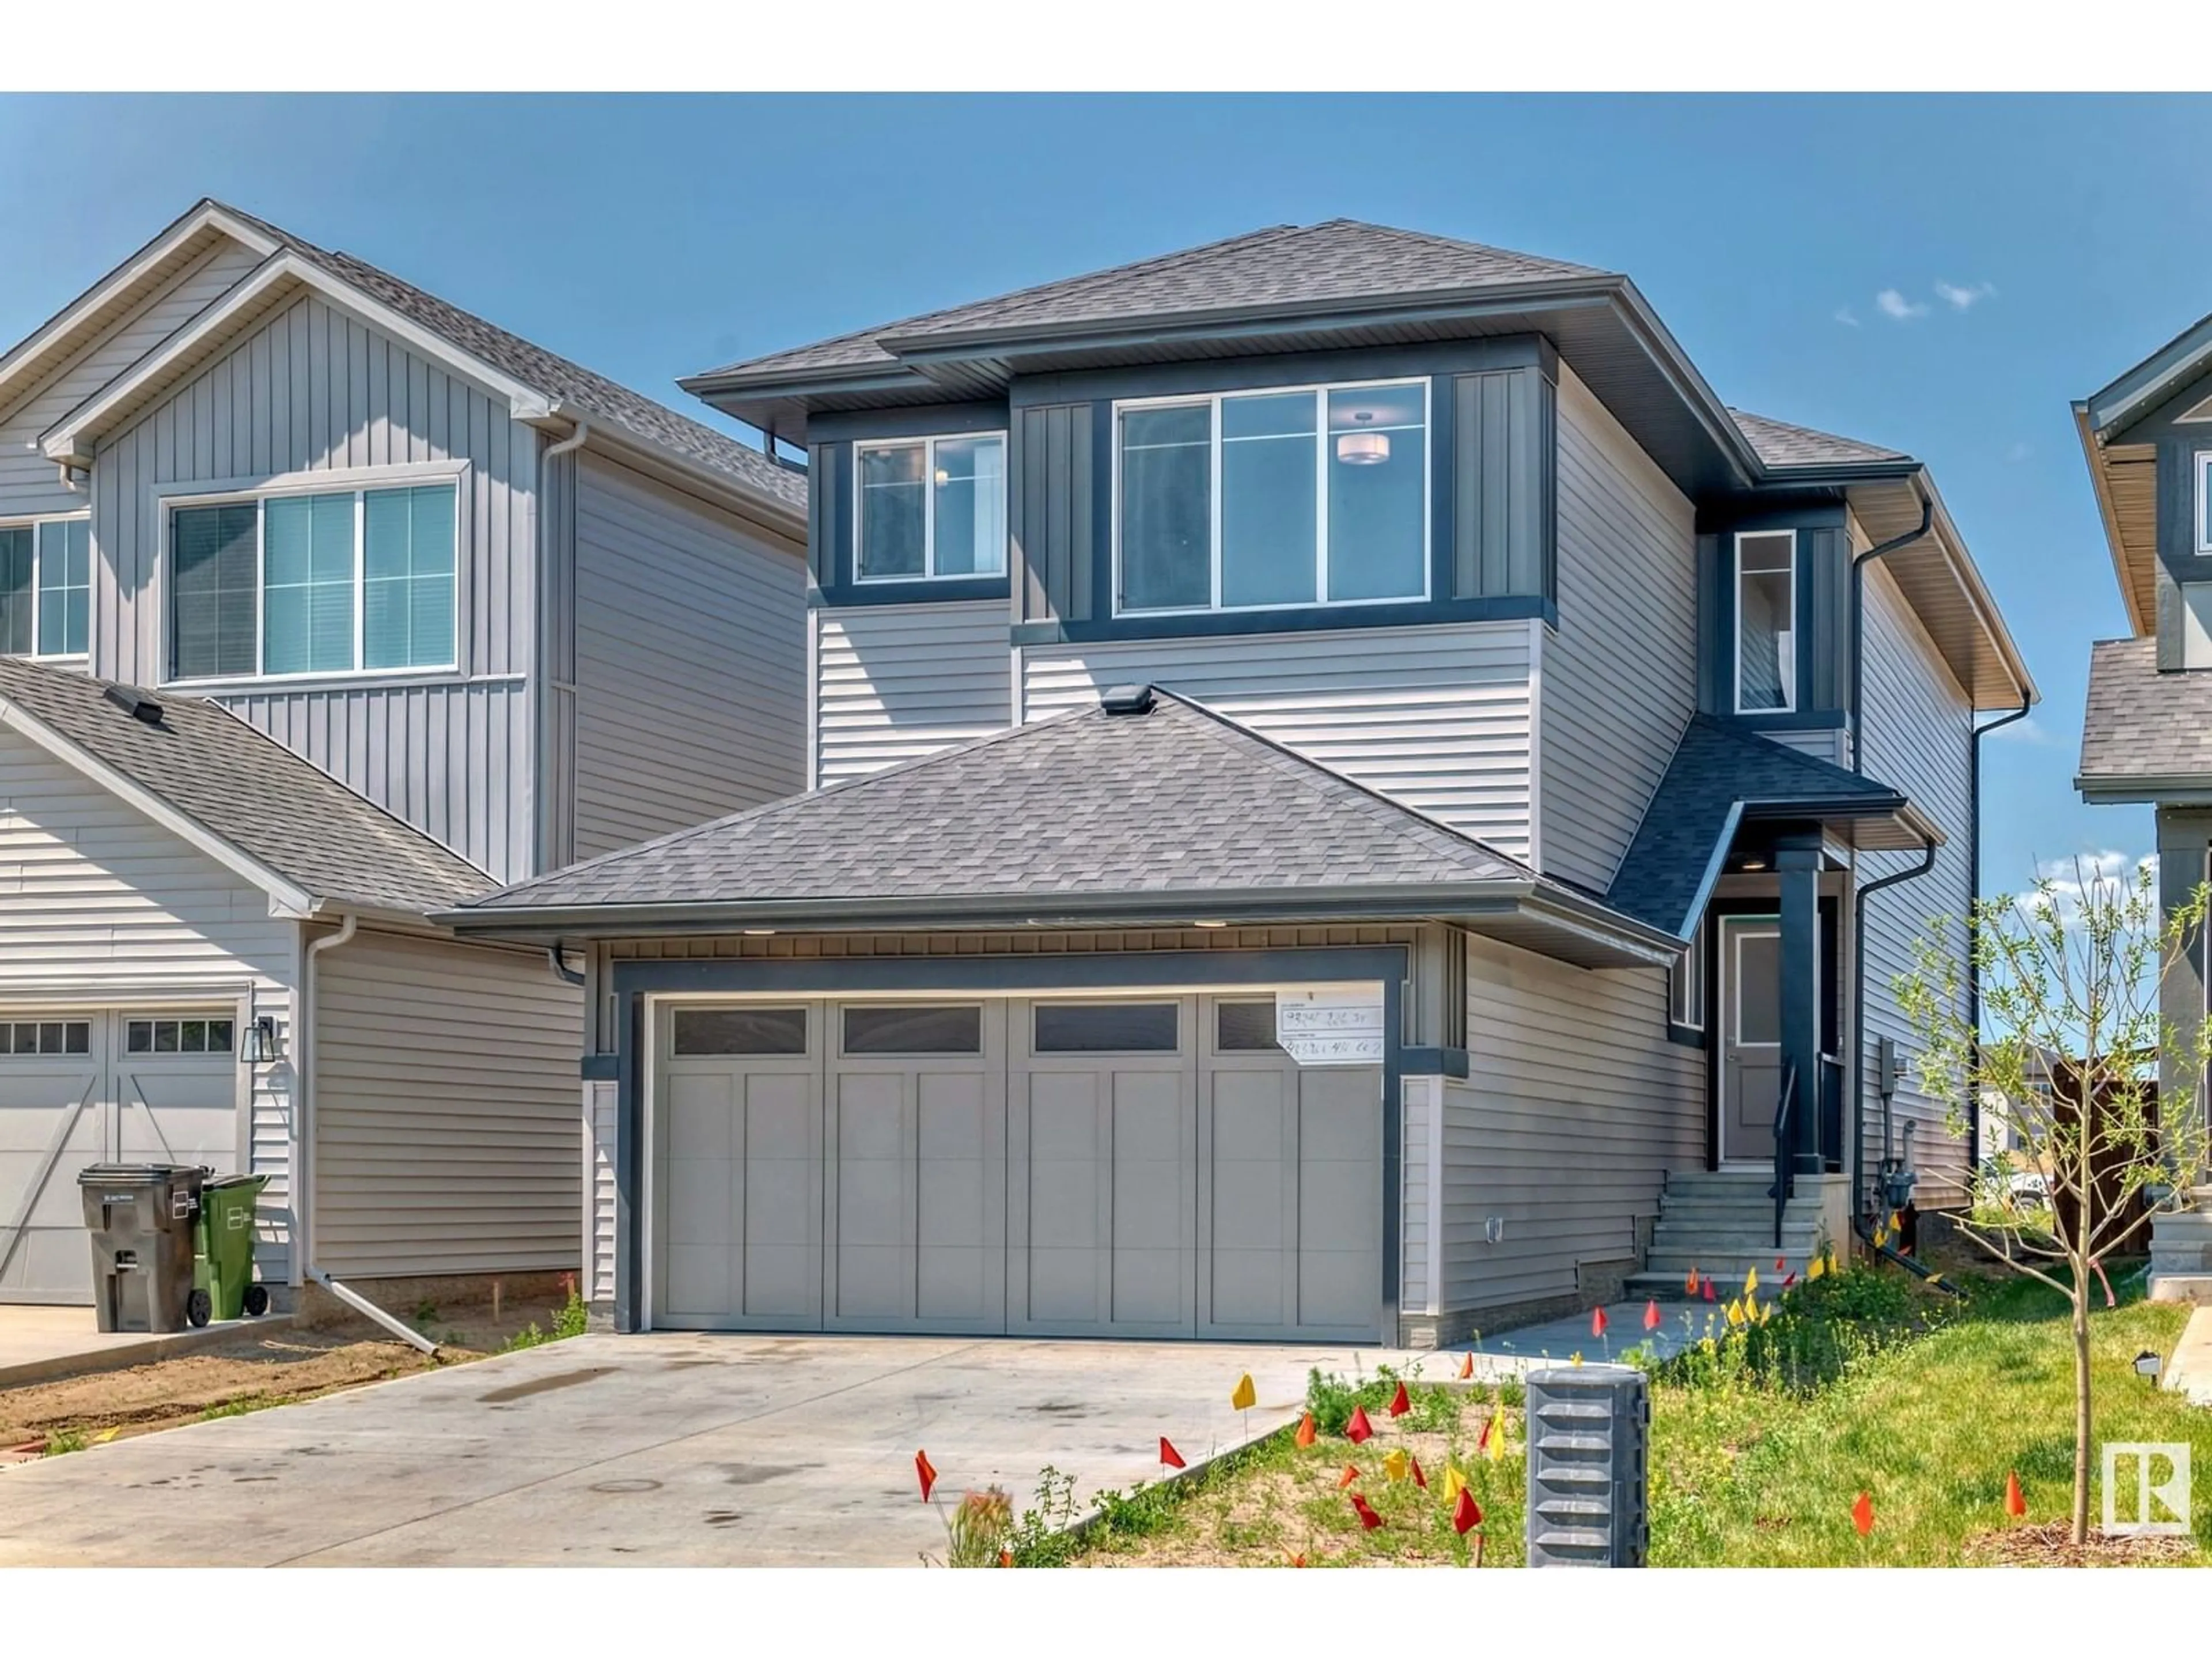 Frontside or backside of a home for 9324 226 ST NW, Edmonton Alberta T5T7R5